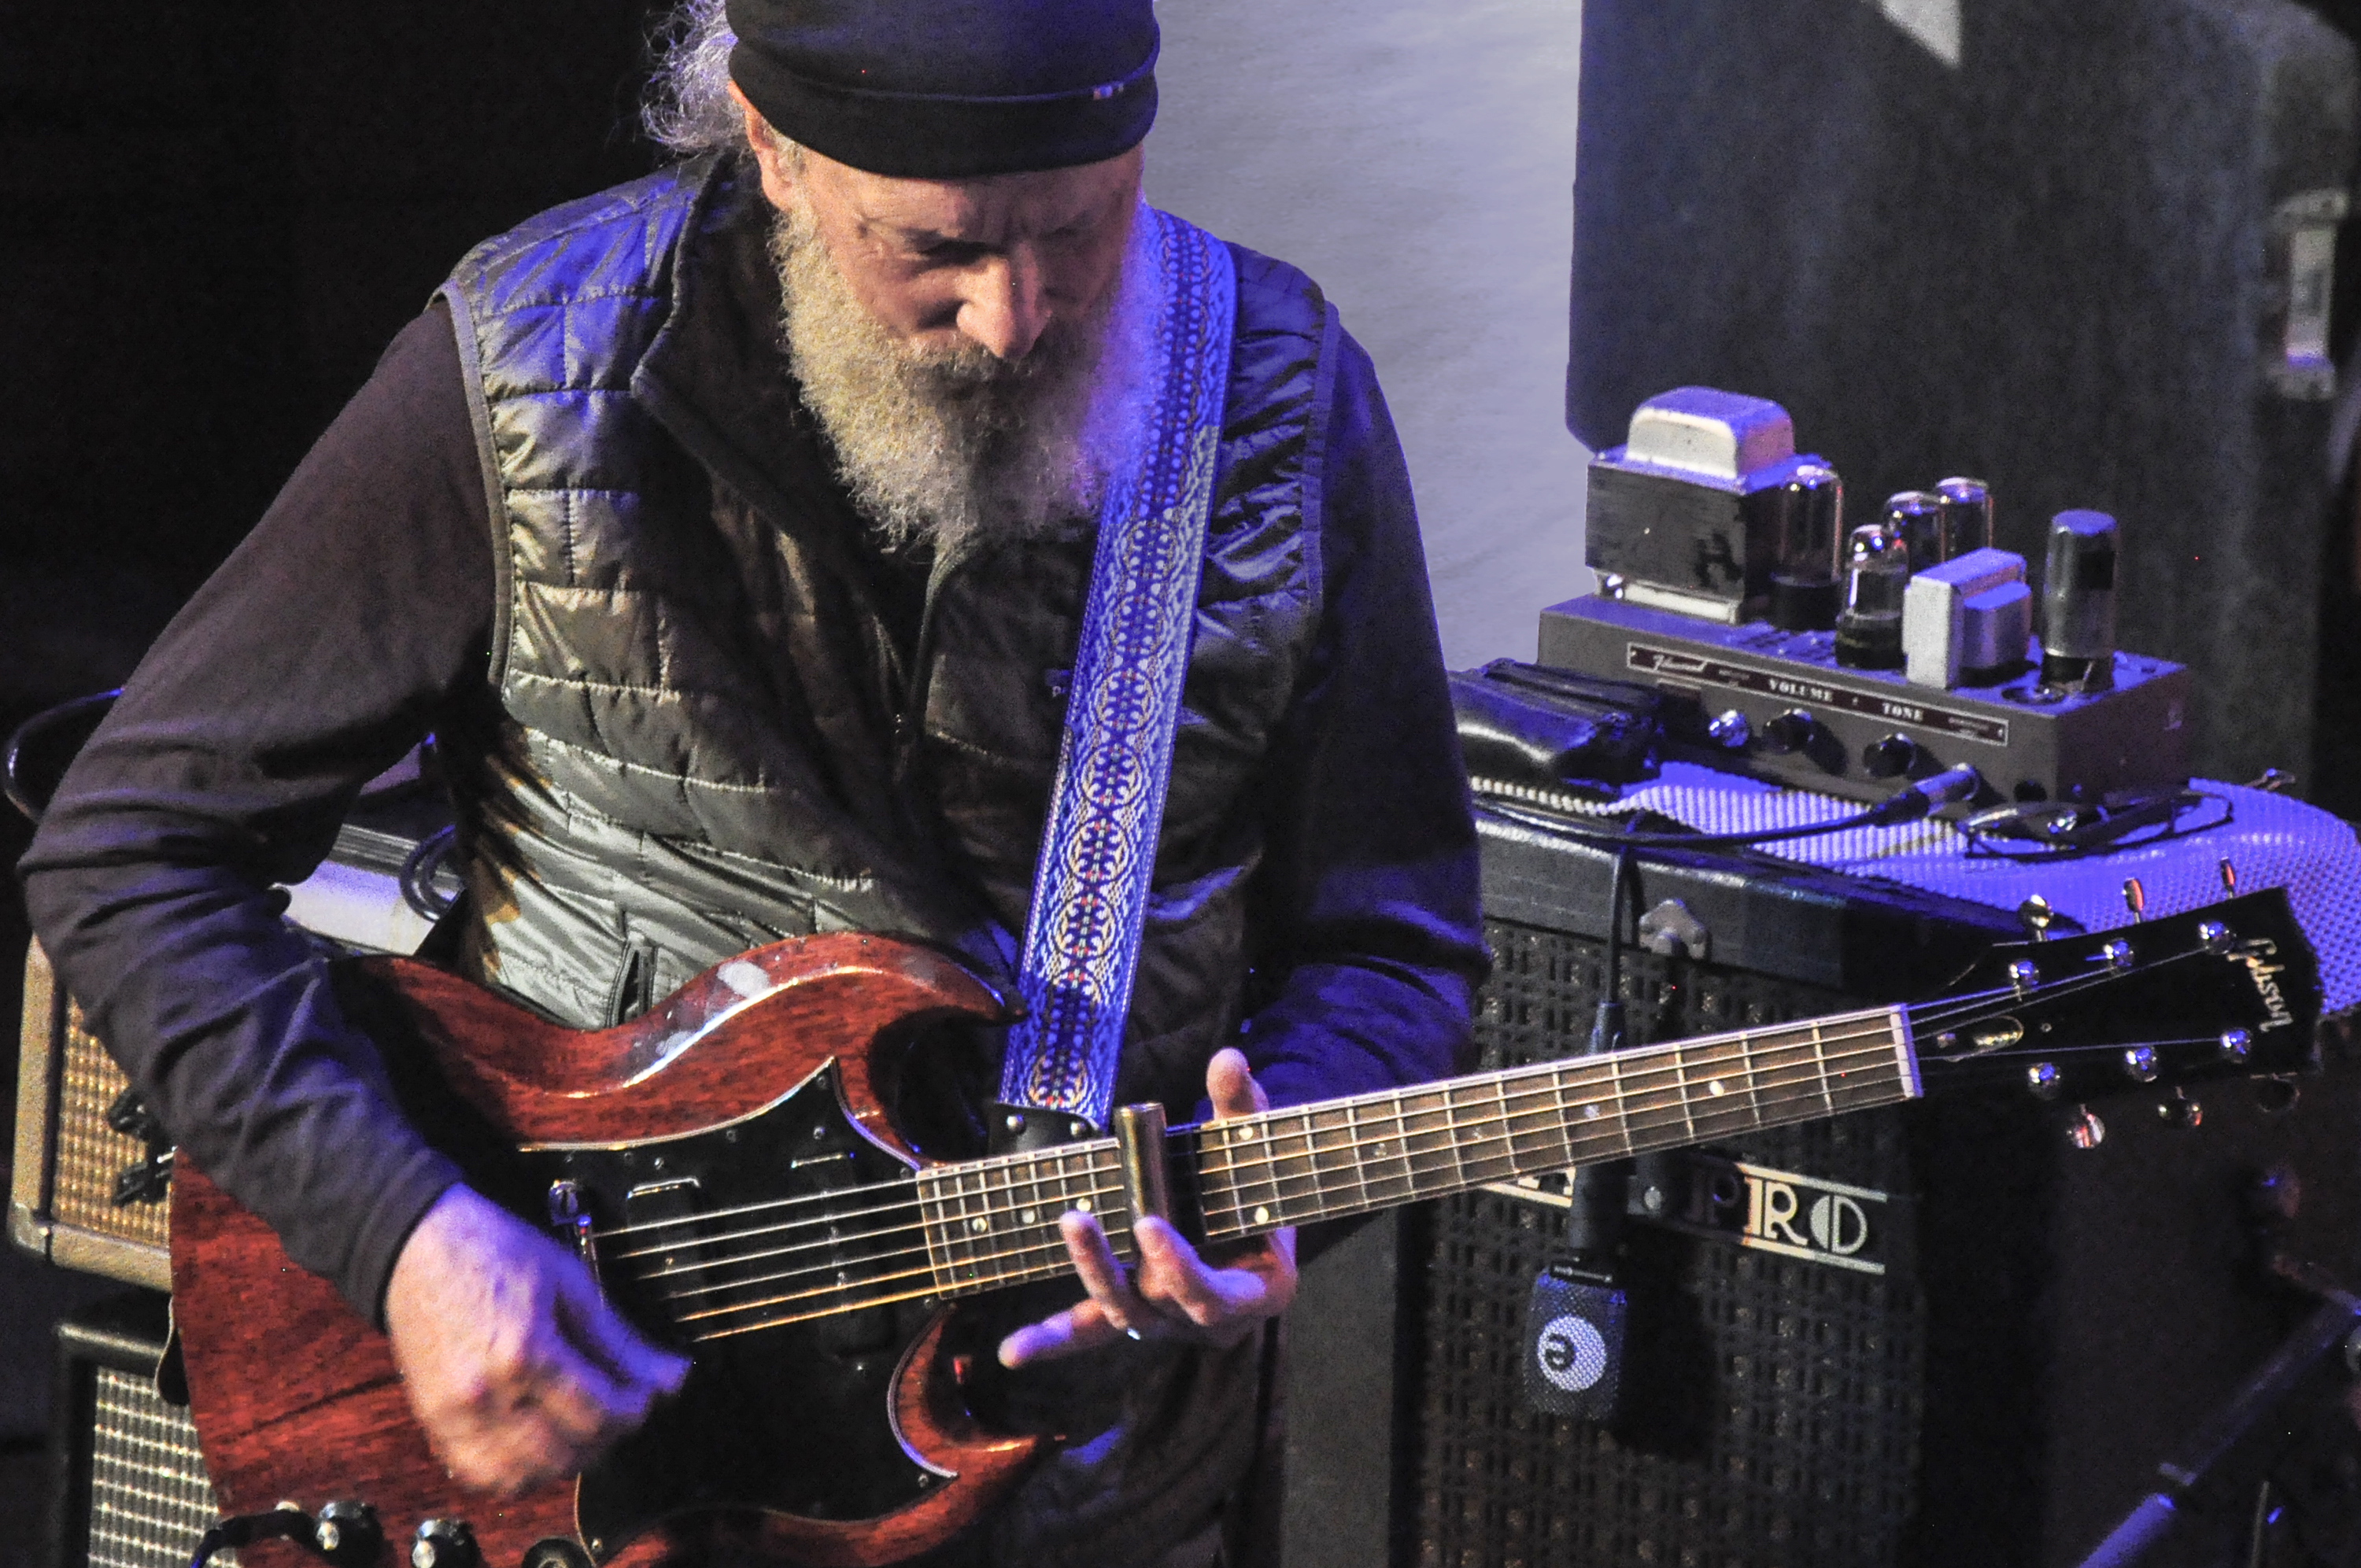 Steve Kimock with his Gibson SG, performing "Touch of Grey"